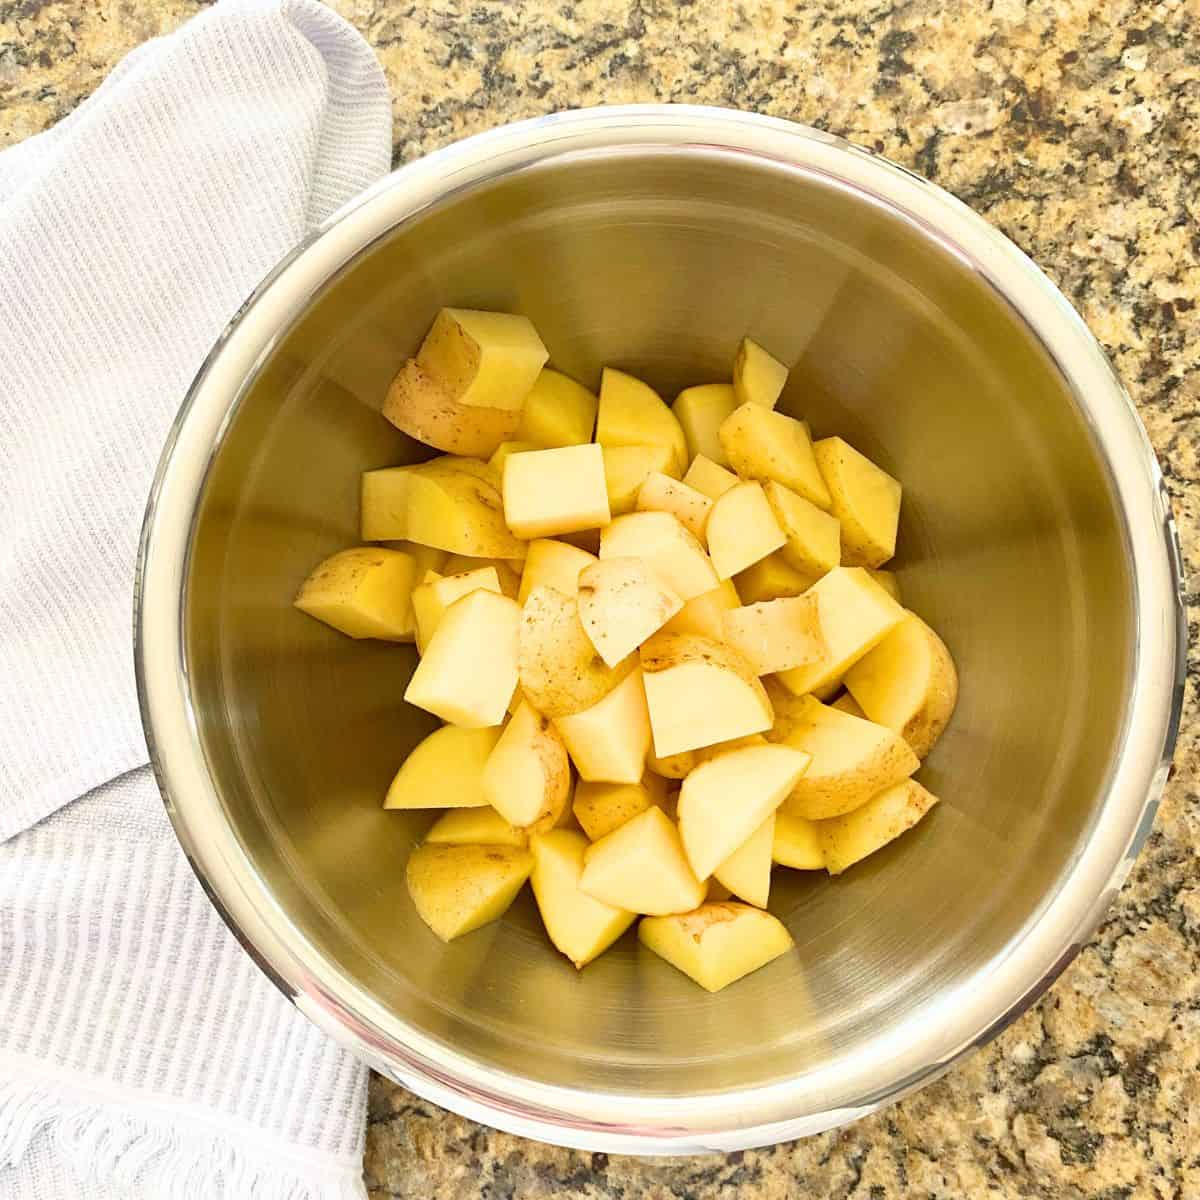 Raw yellow potatoes in a stainless steel mixing bowl